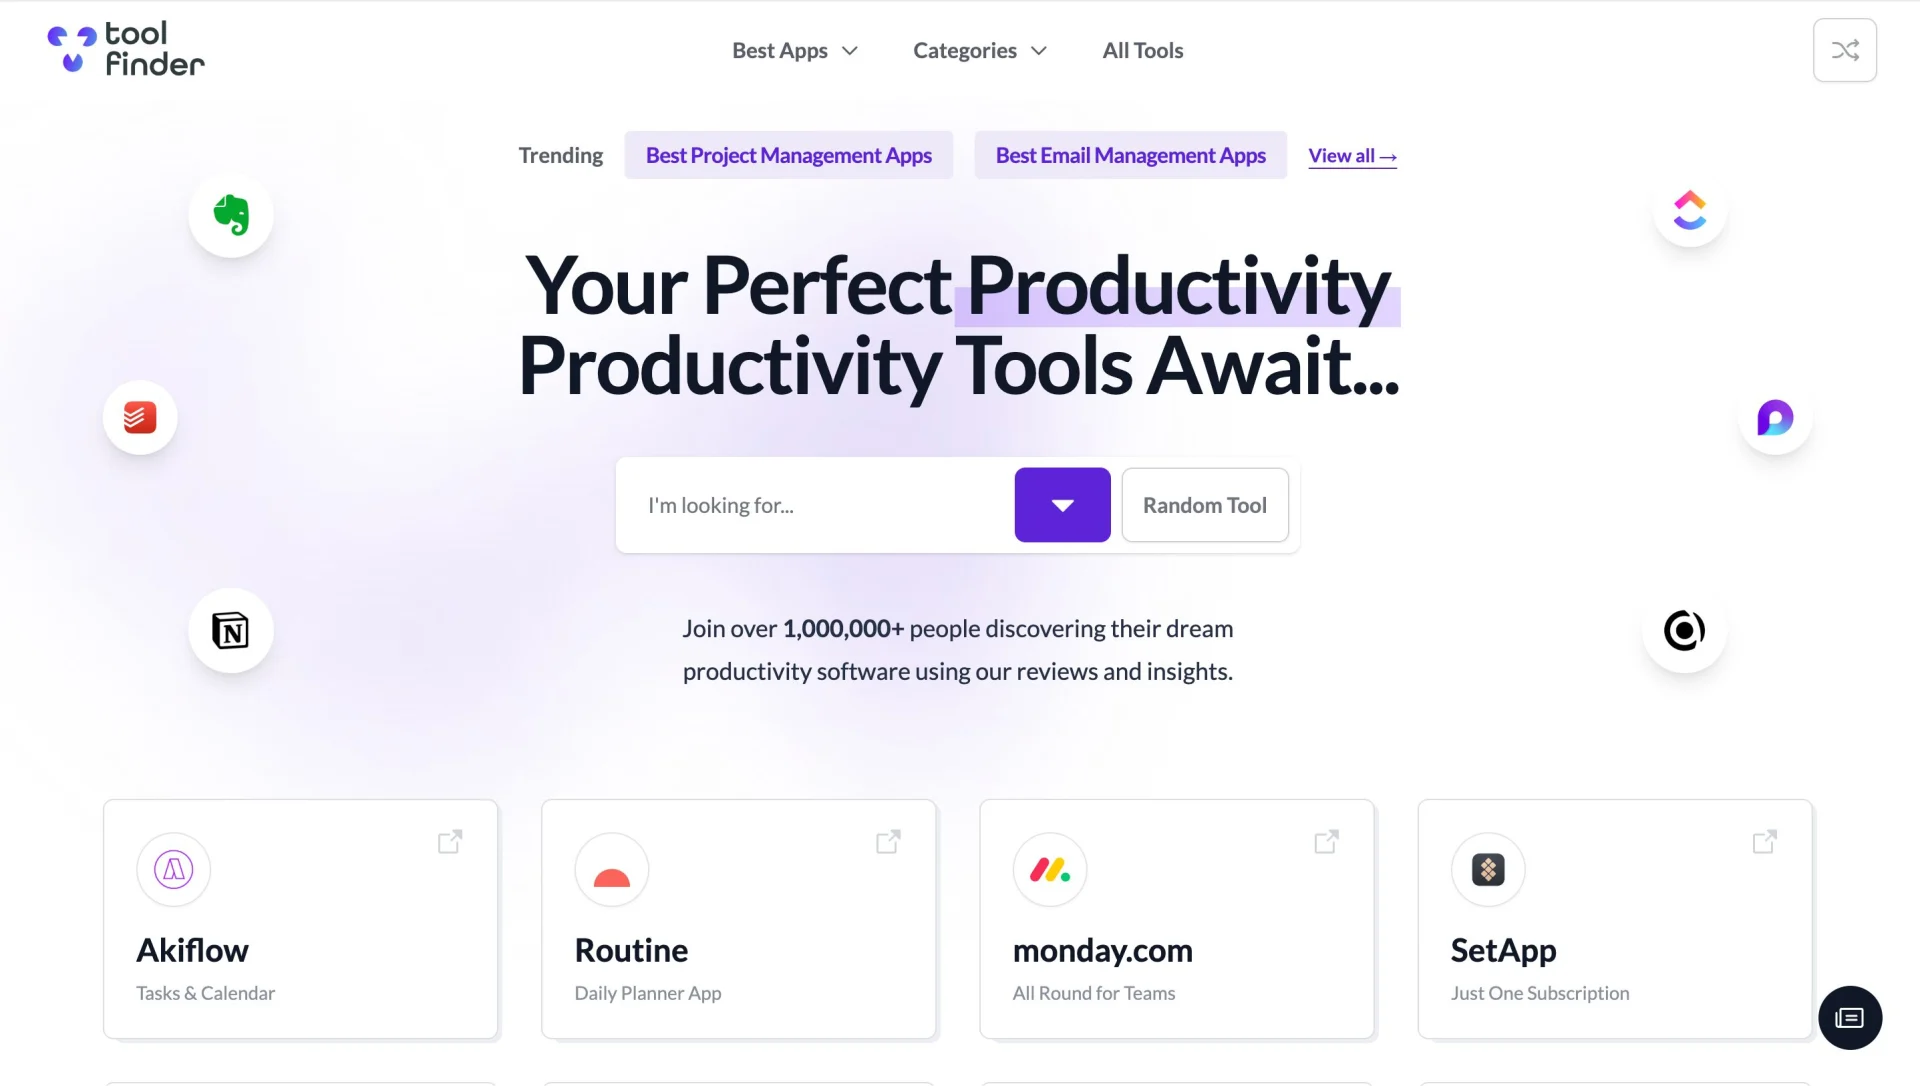 Tool Finder shares productivity app reviews, app lists, and productivity guides.